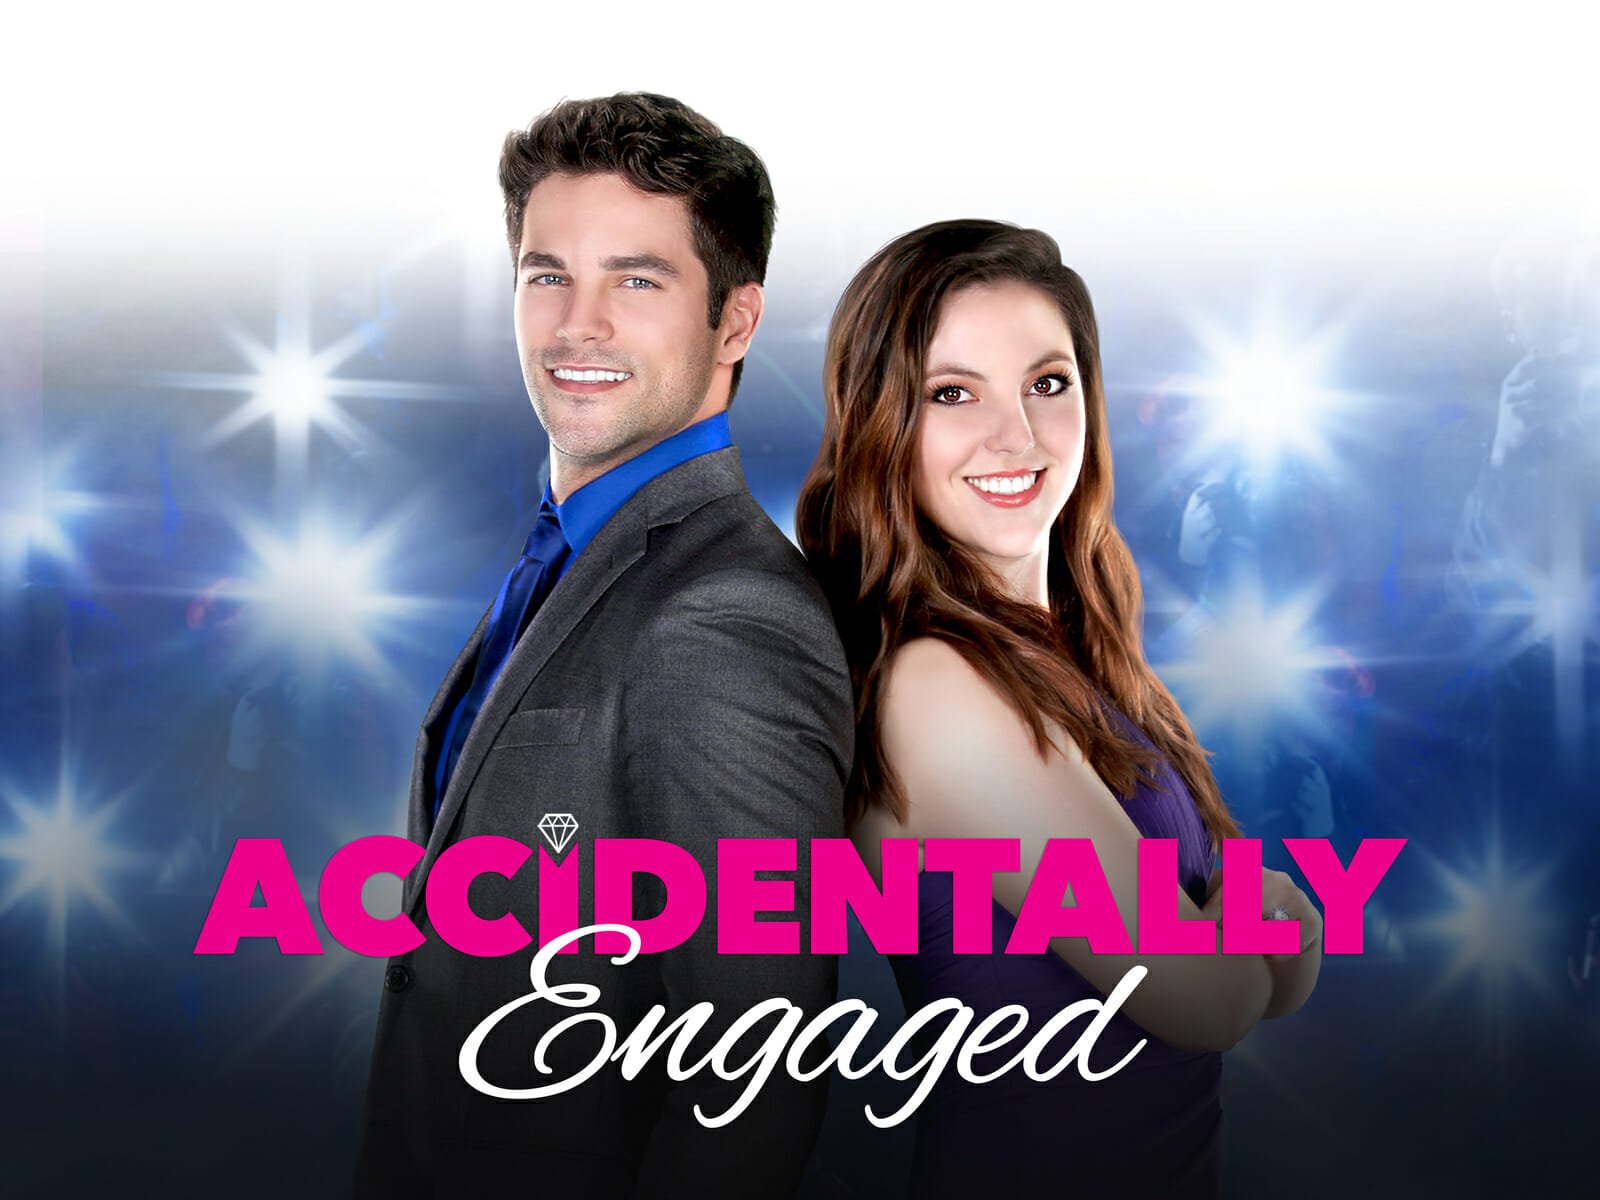 Best romantic movies on amazon prime: Accidentally Engaged